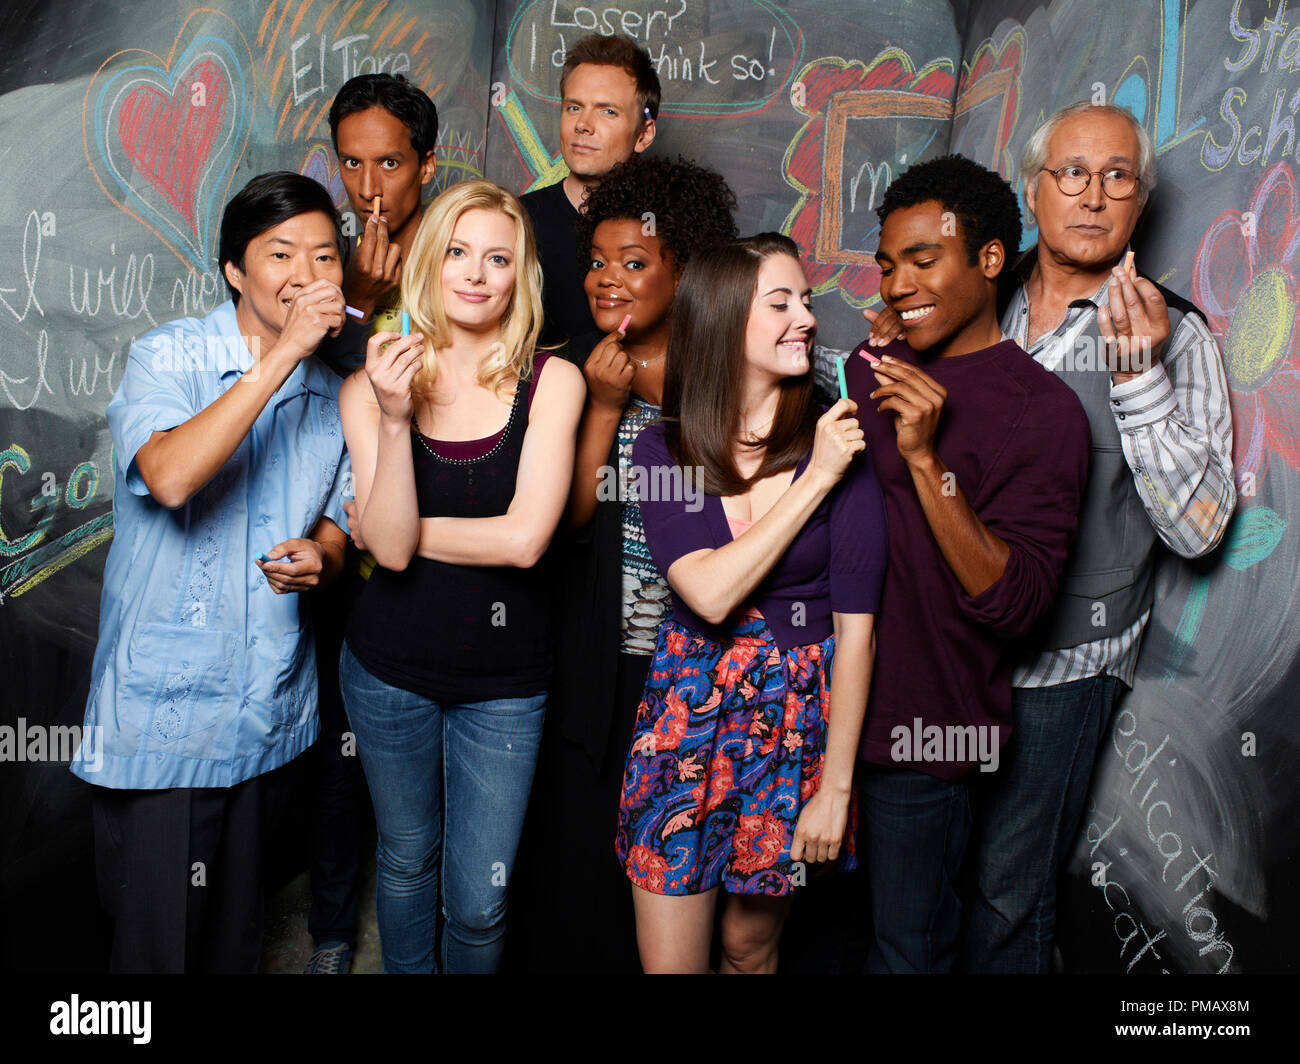 Community Staffel 1 (2009-2010) Yvette Nicole Brown, Danny Pudi, Gillian Jacobs, Donald Glover, Chevy Chase, Alison Brie, Ken Jeong Stockfoto